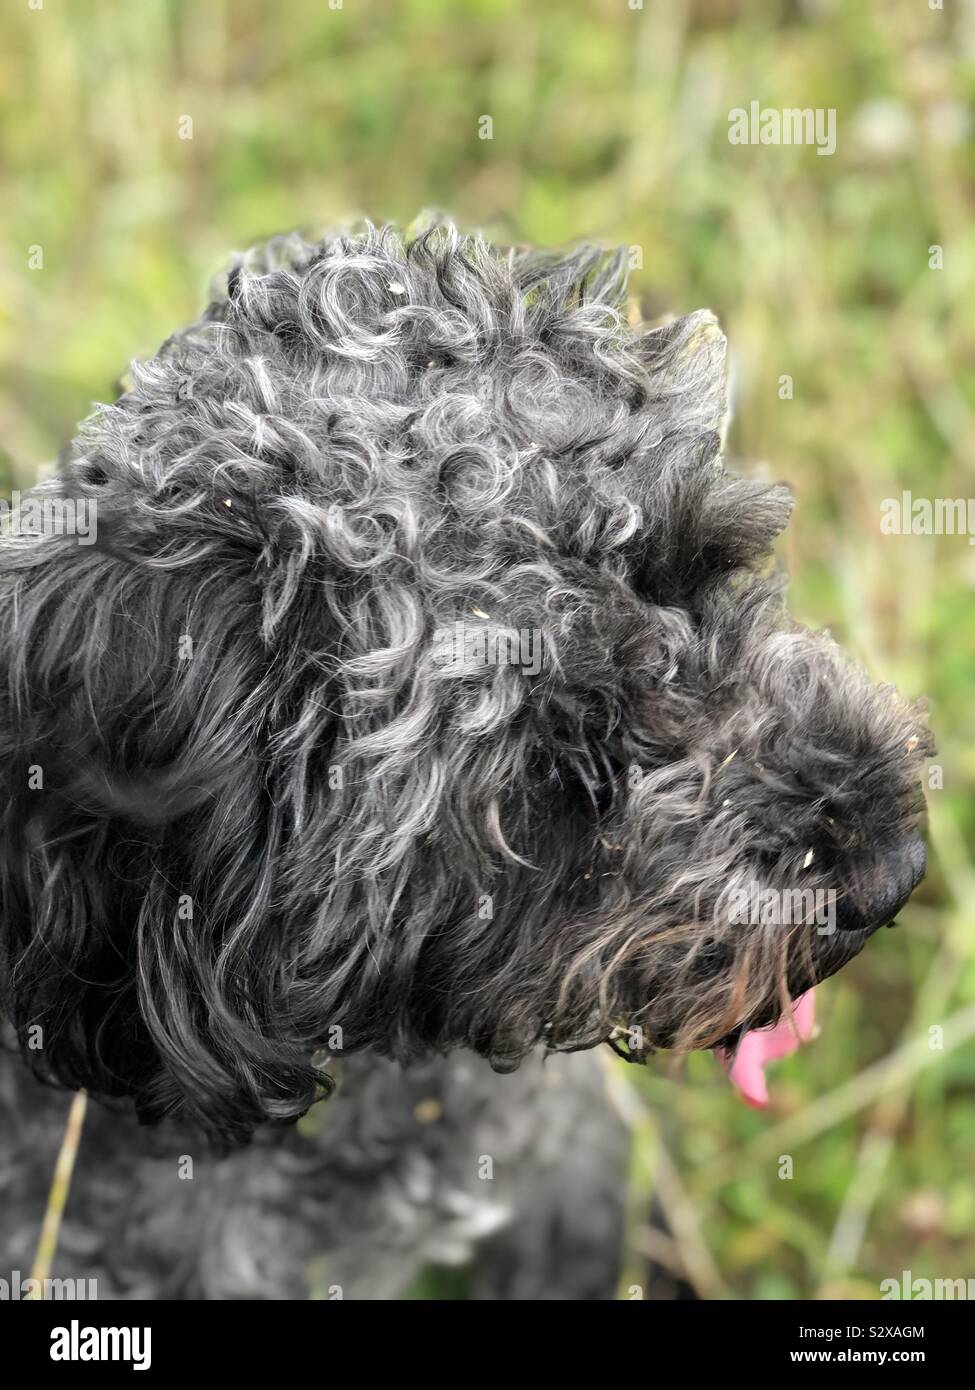 Tousled curly silver tinted black fur of schnoodle. Close up of top of head, floppy ears, pink tongue and background of green field grass. Stock Photo